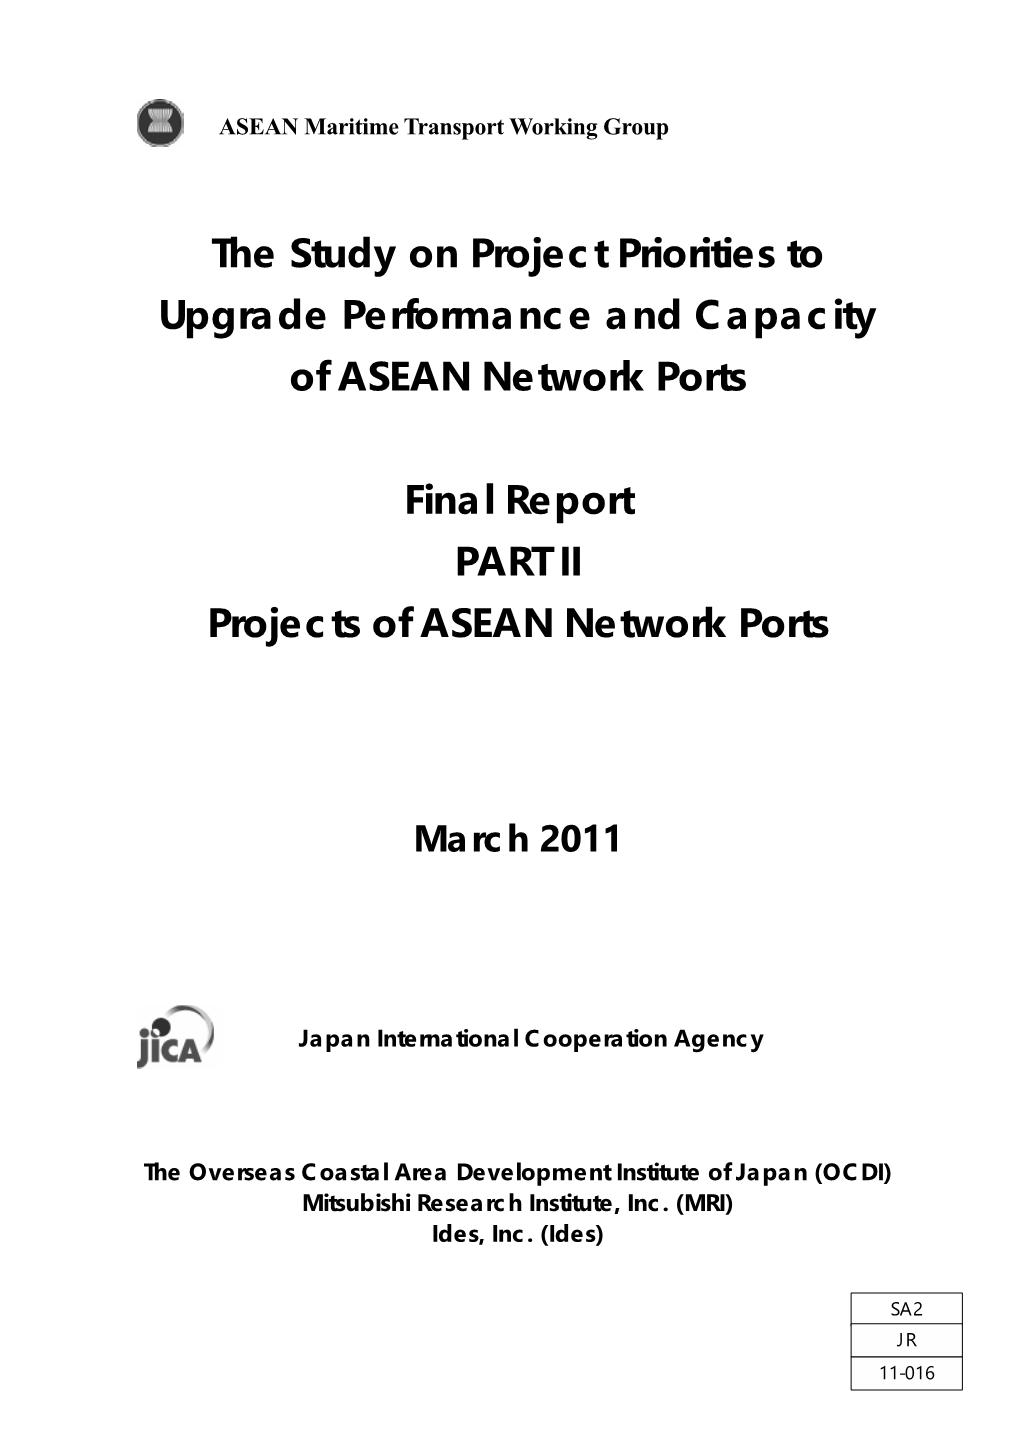 The Study on Project Priorities to Upgrade Performance and Capacity of ASEAN Network Ports